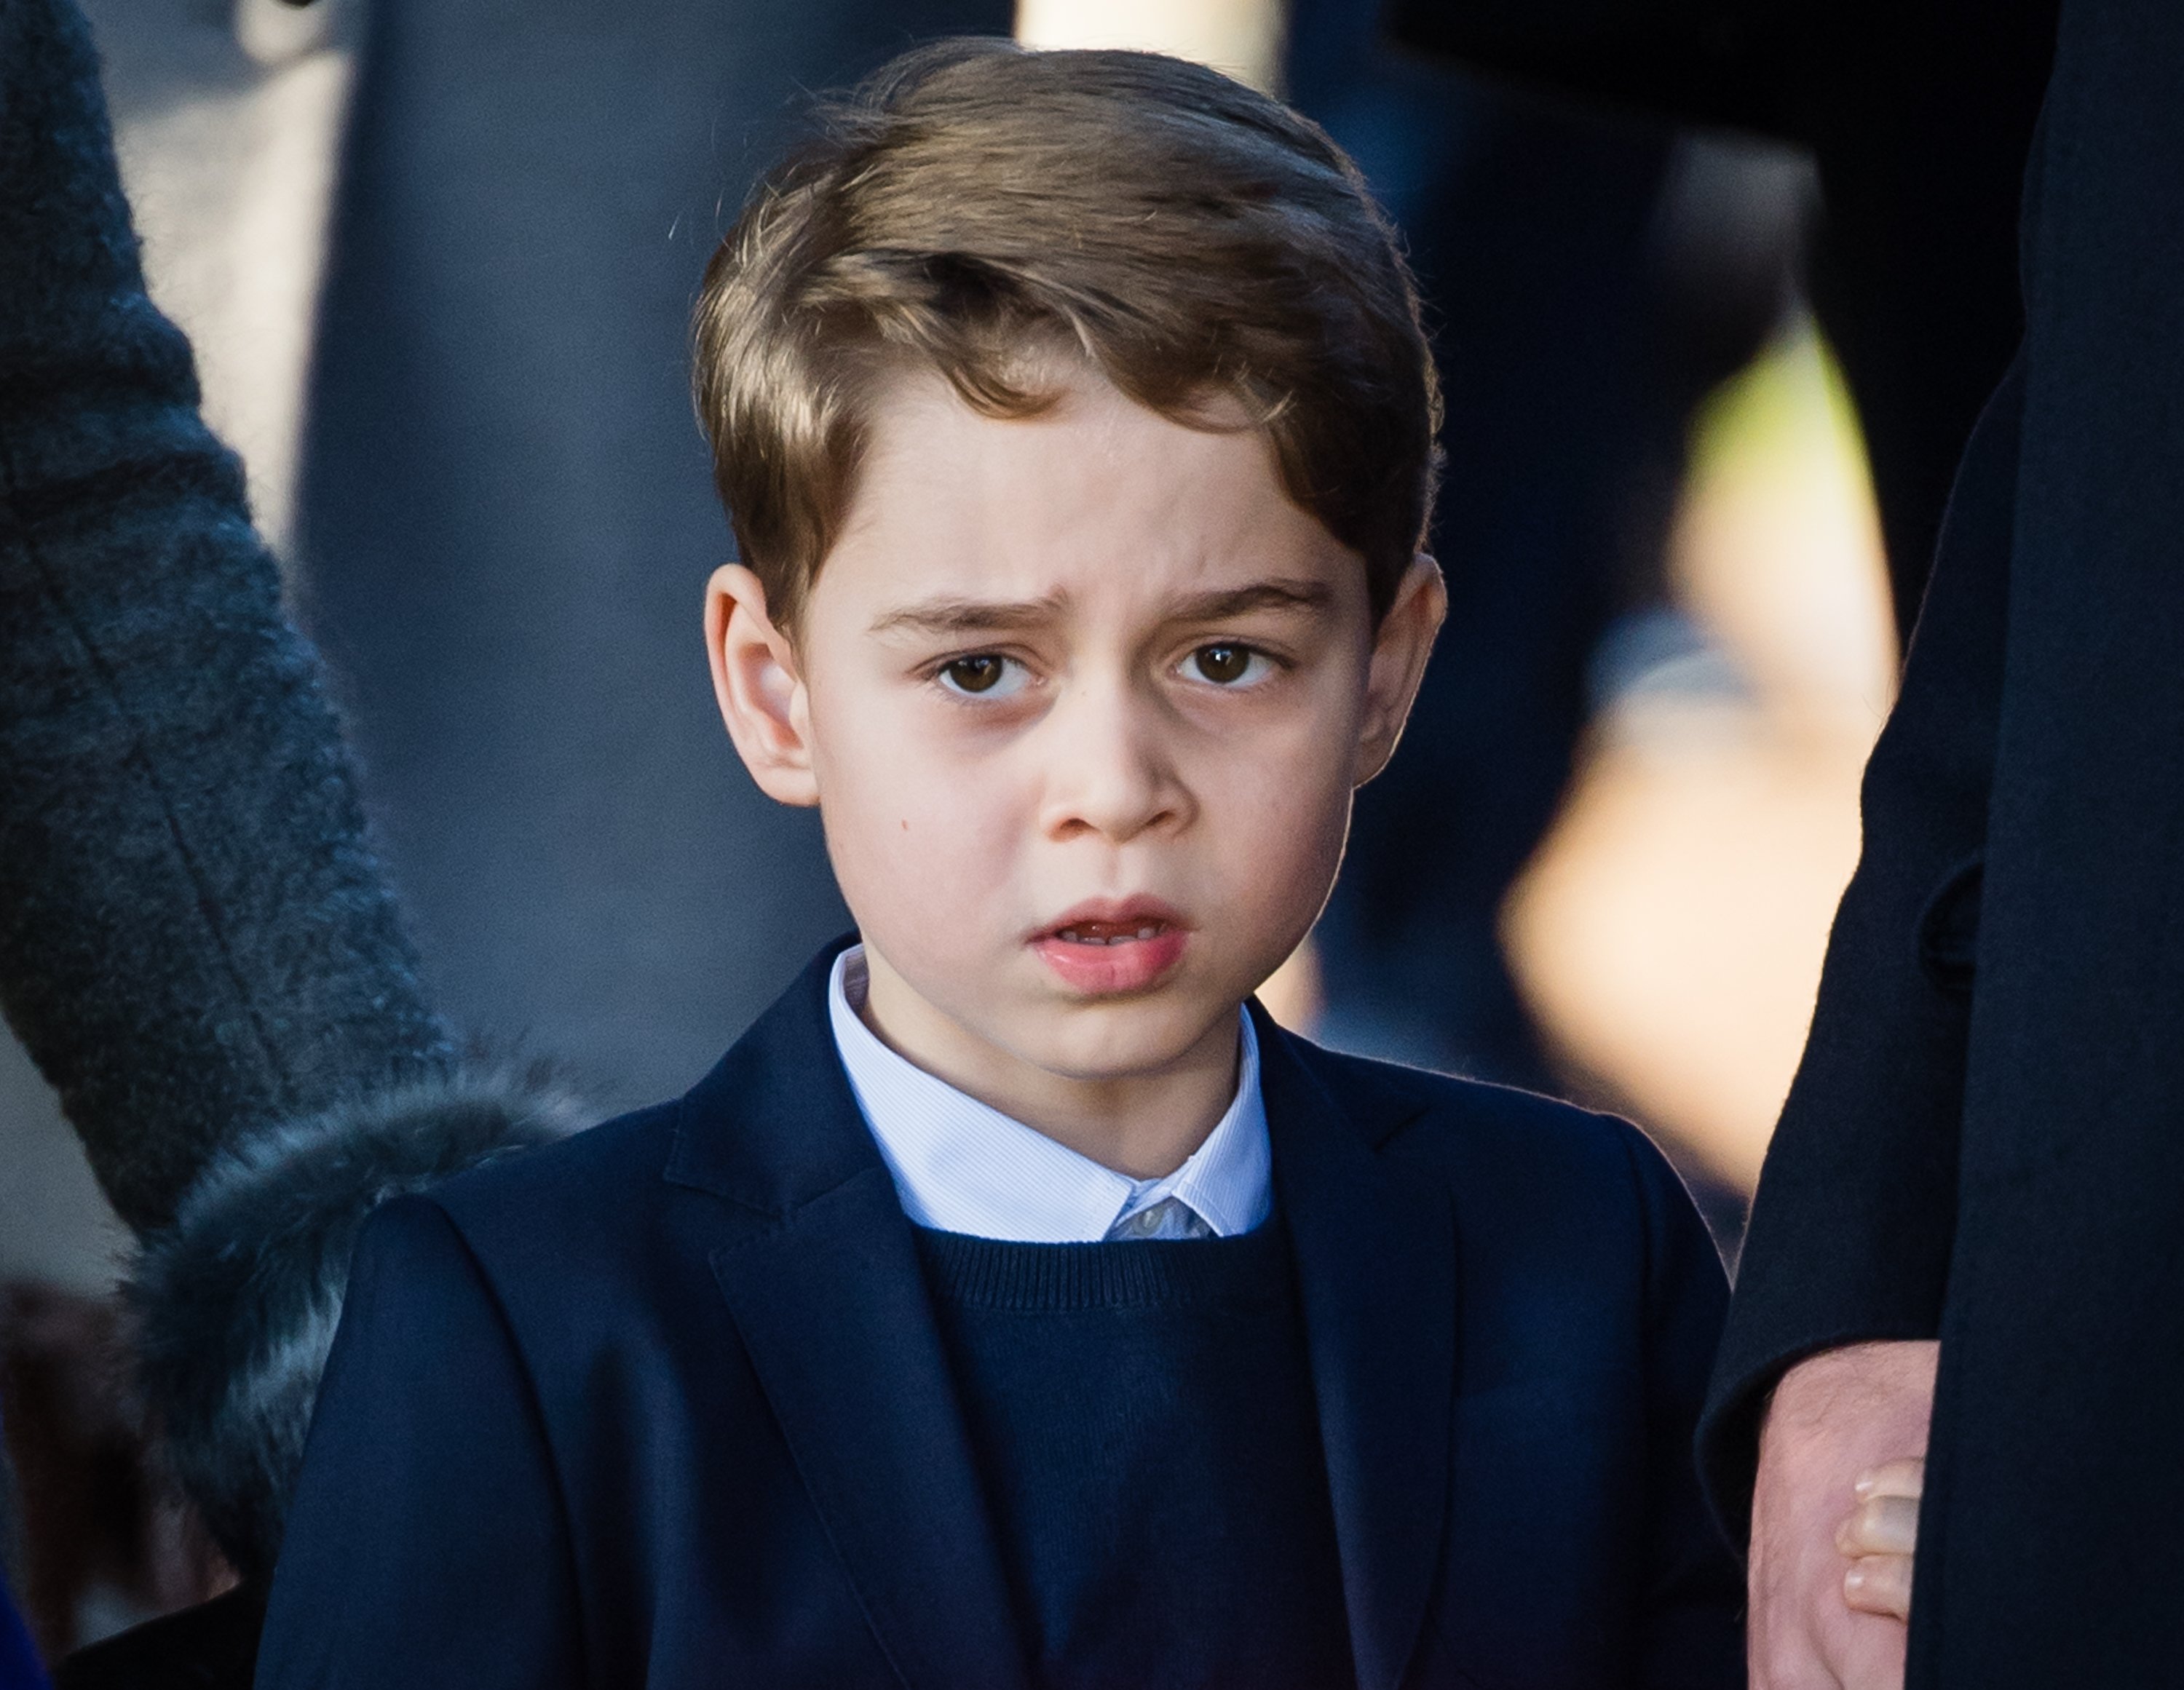 Prince George of Cambridge attends the Christmas Day Church service at Church of St Mary Magdalene on the Sandringham estate on December 25, 2019 in King's Lynn, United Kingdom. | Source: Getty Images